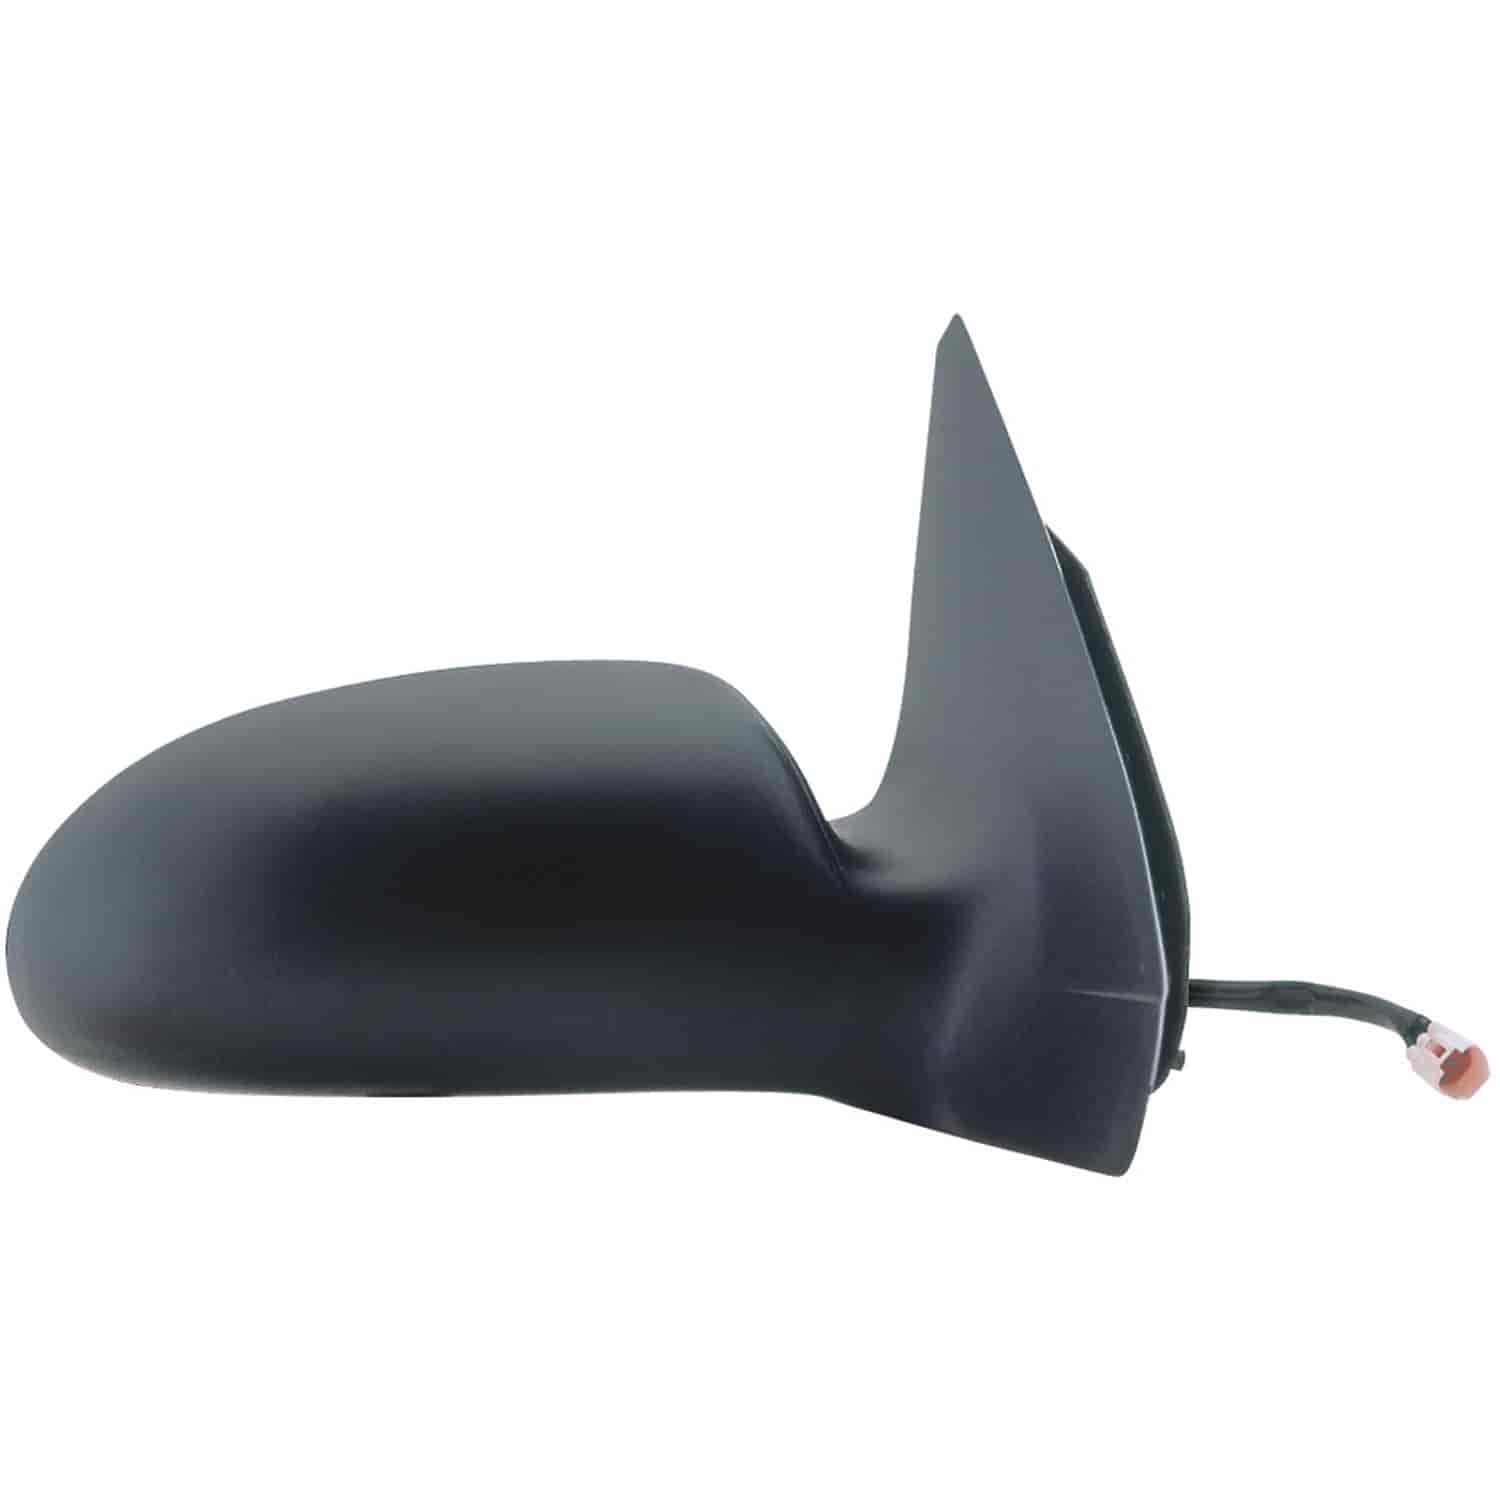 OEM Style Replacement mirror for 03-07 Ford Focus w/o SVT/ST model passenger side mirror tested to f